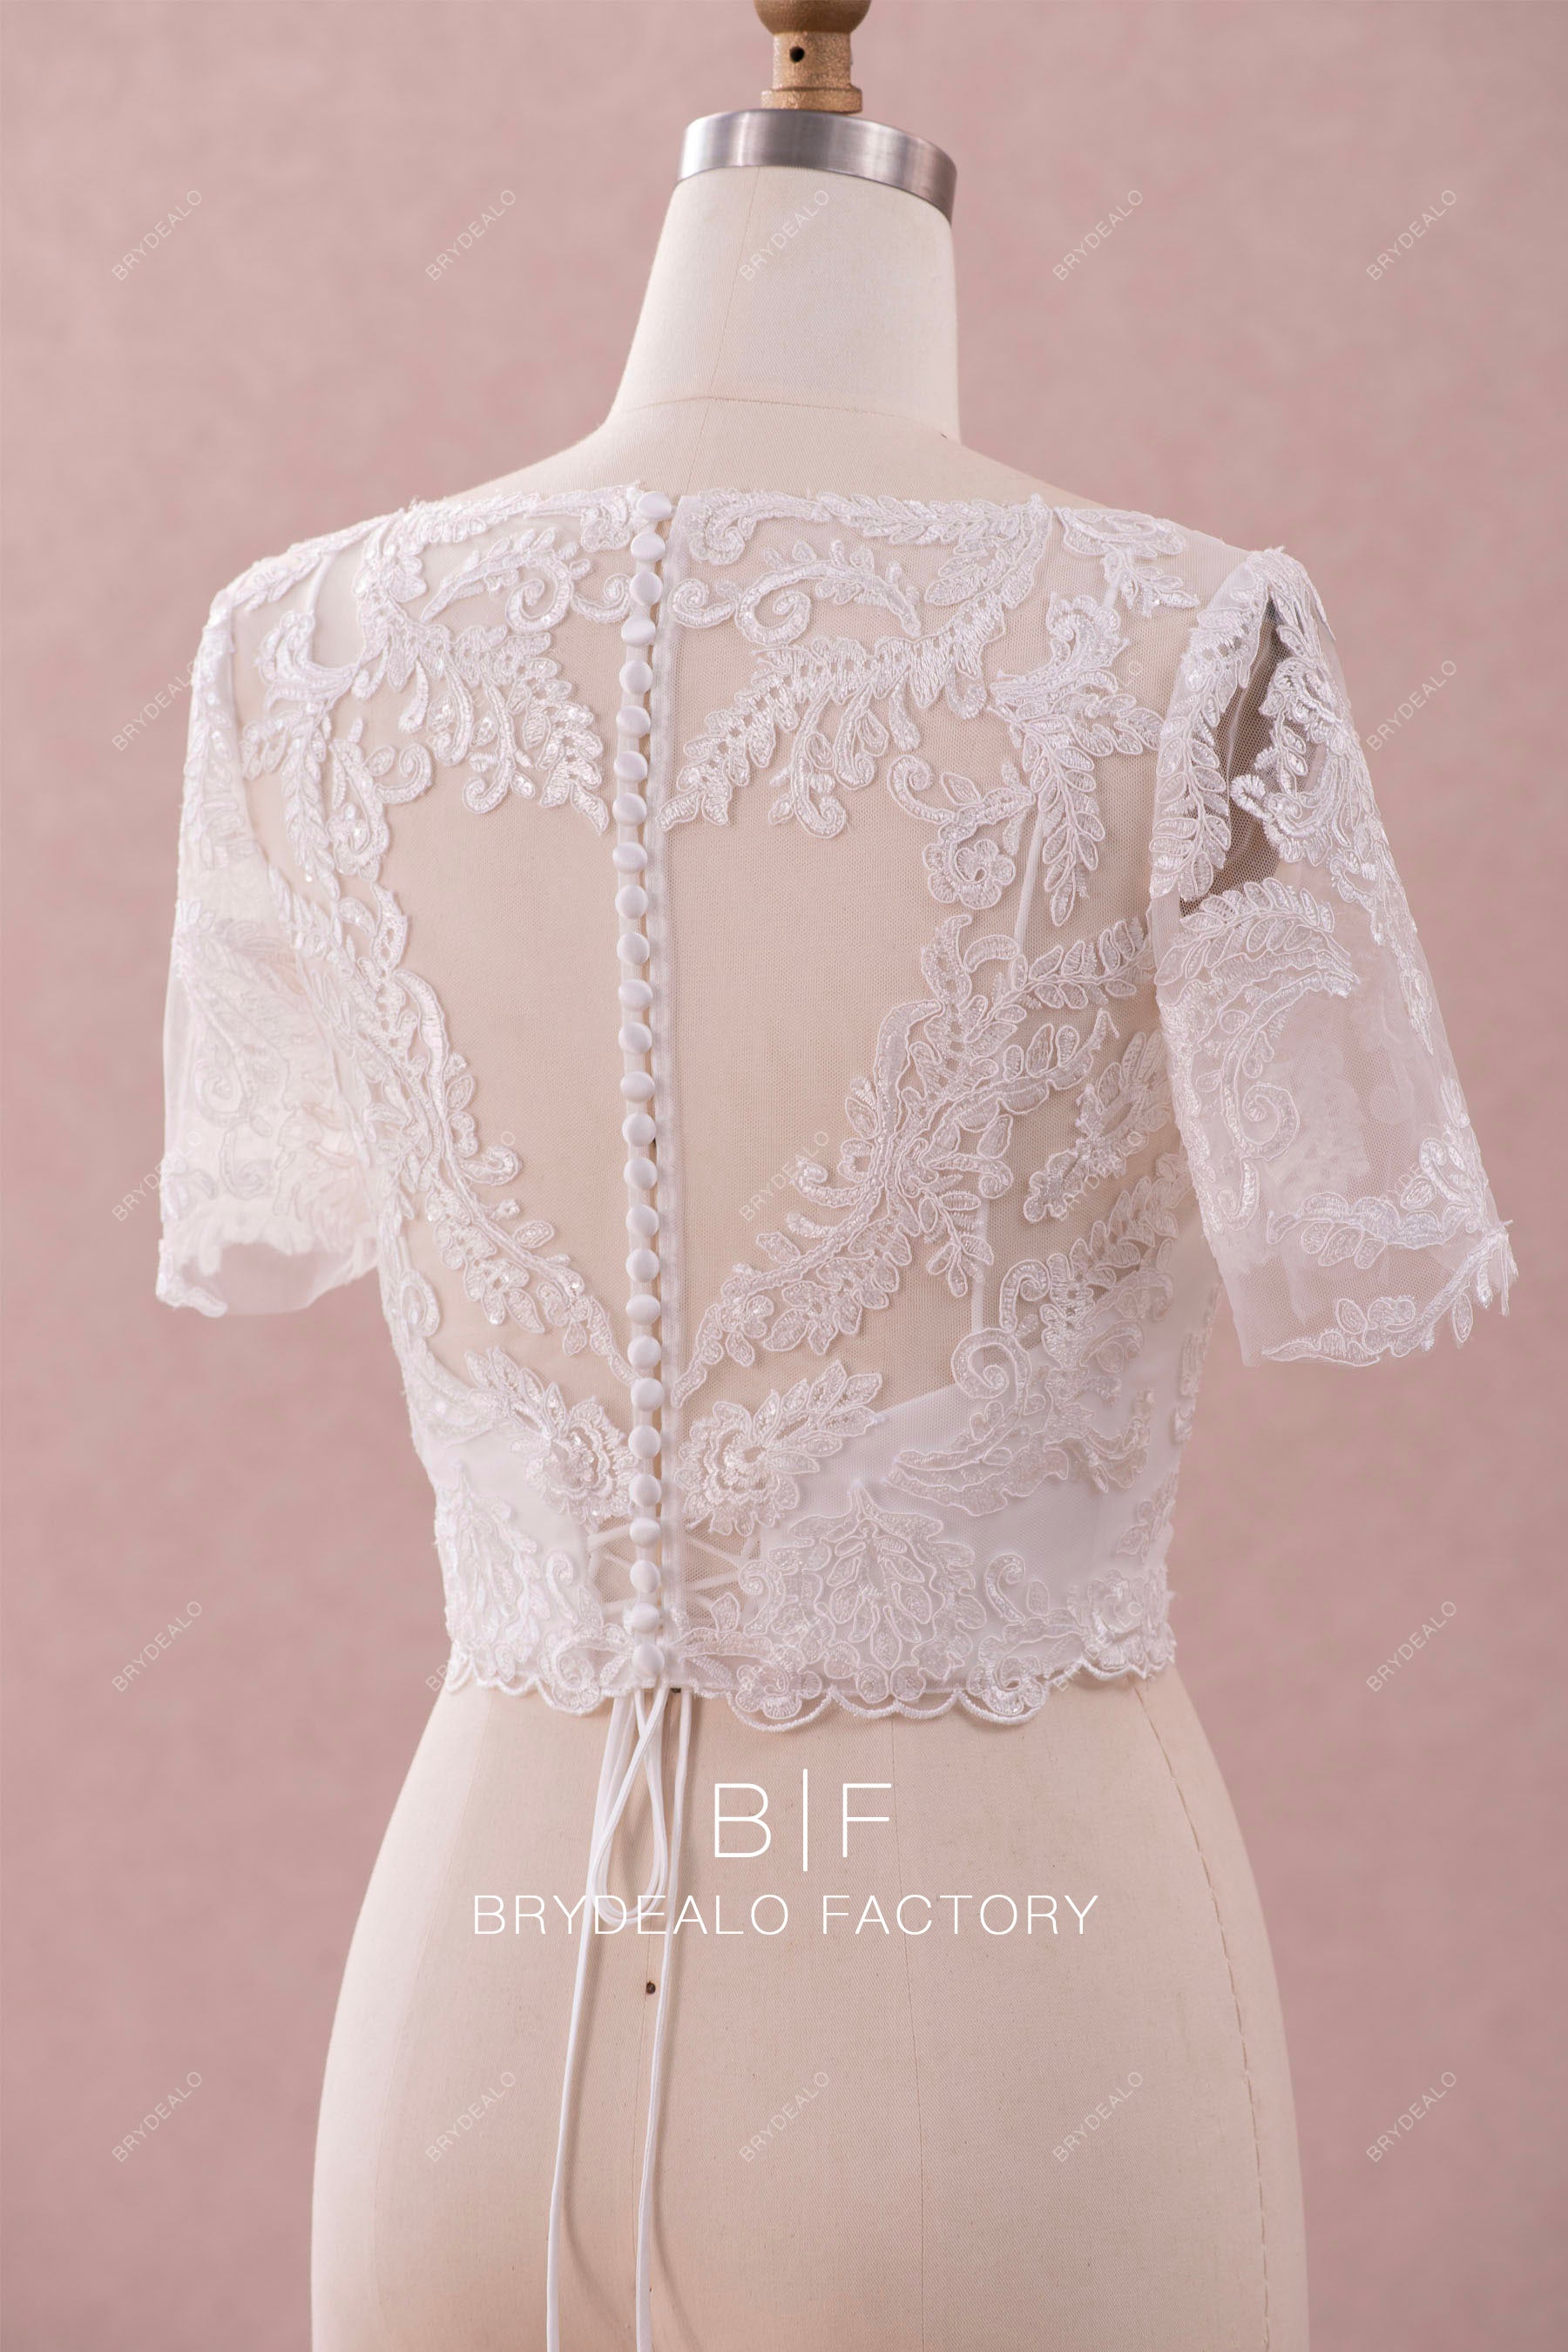 sleeved buttoned back lace bridal top